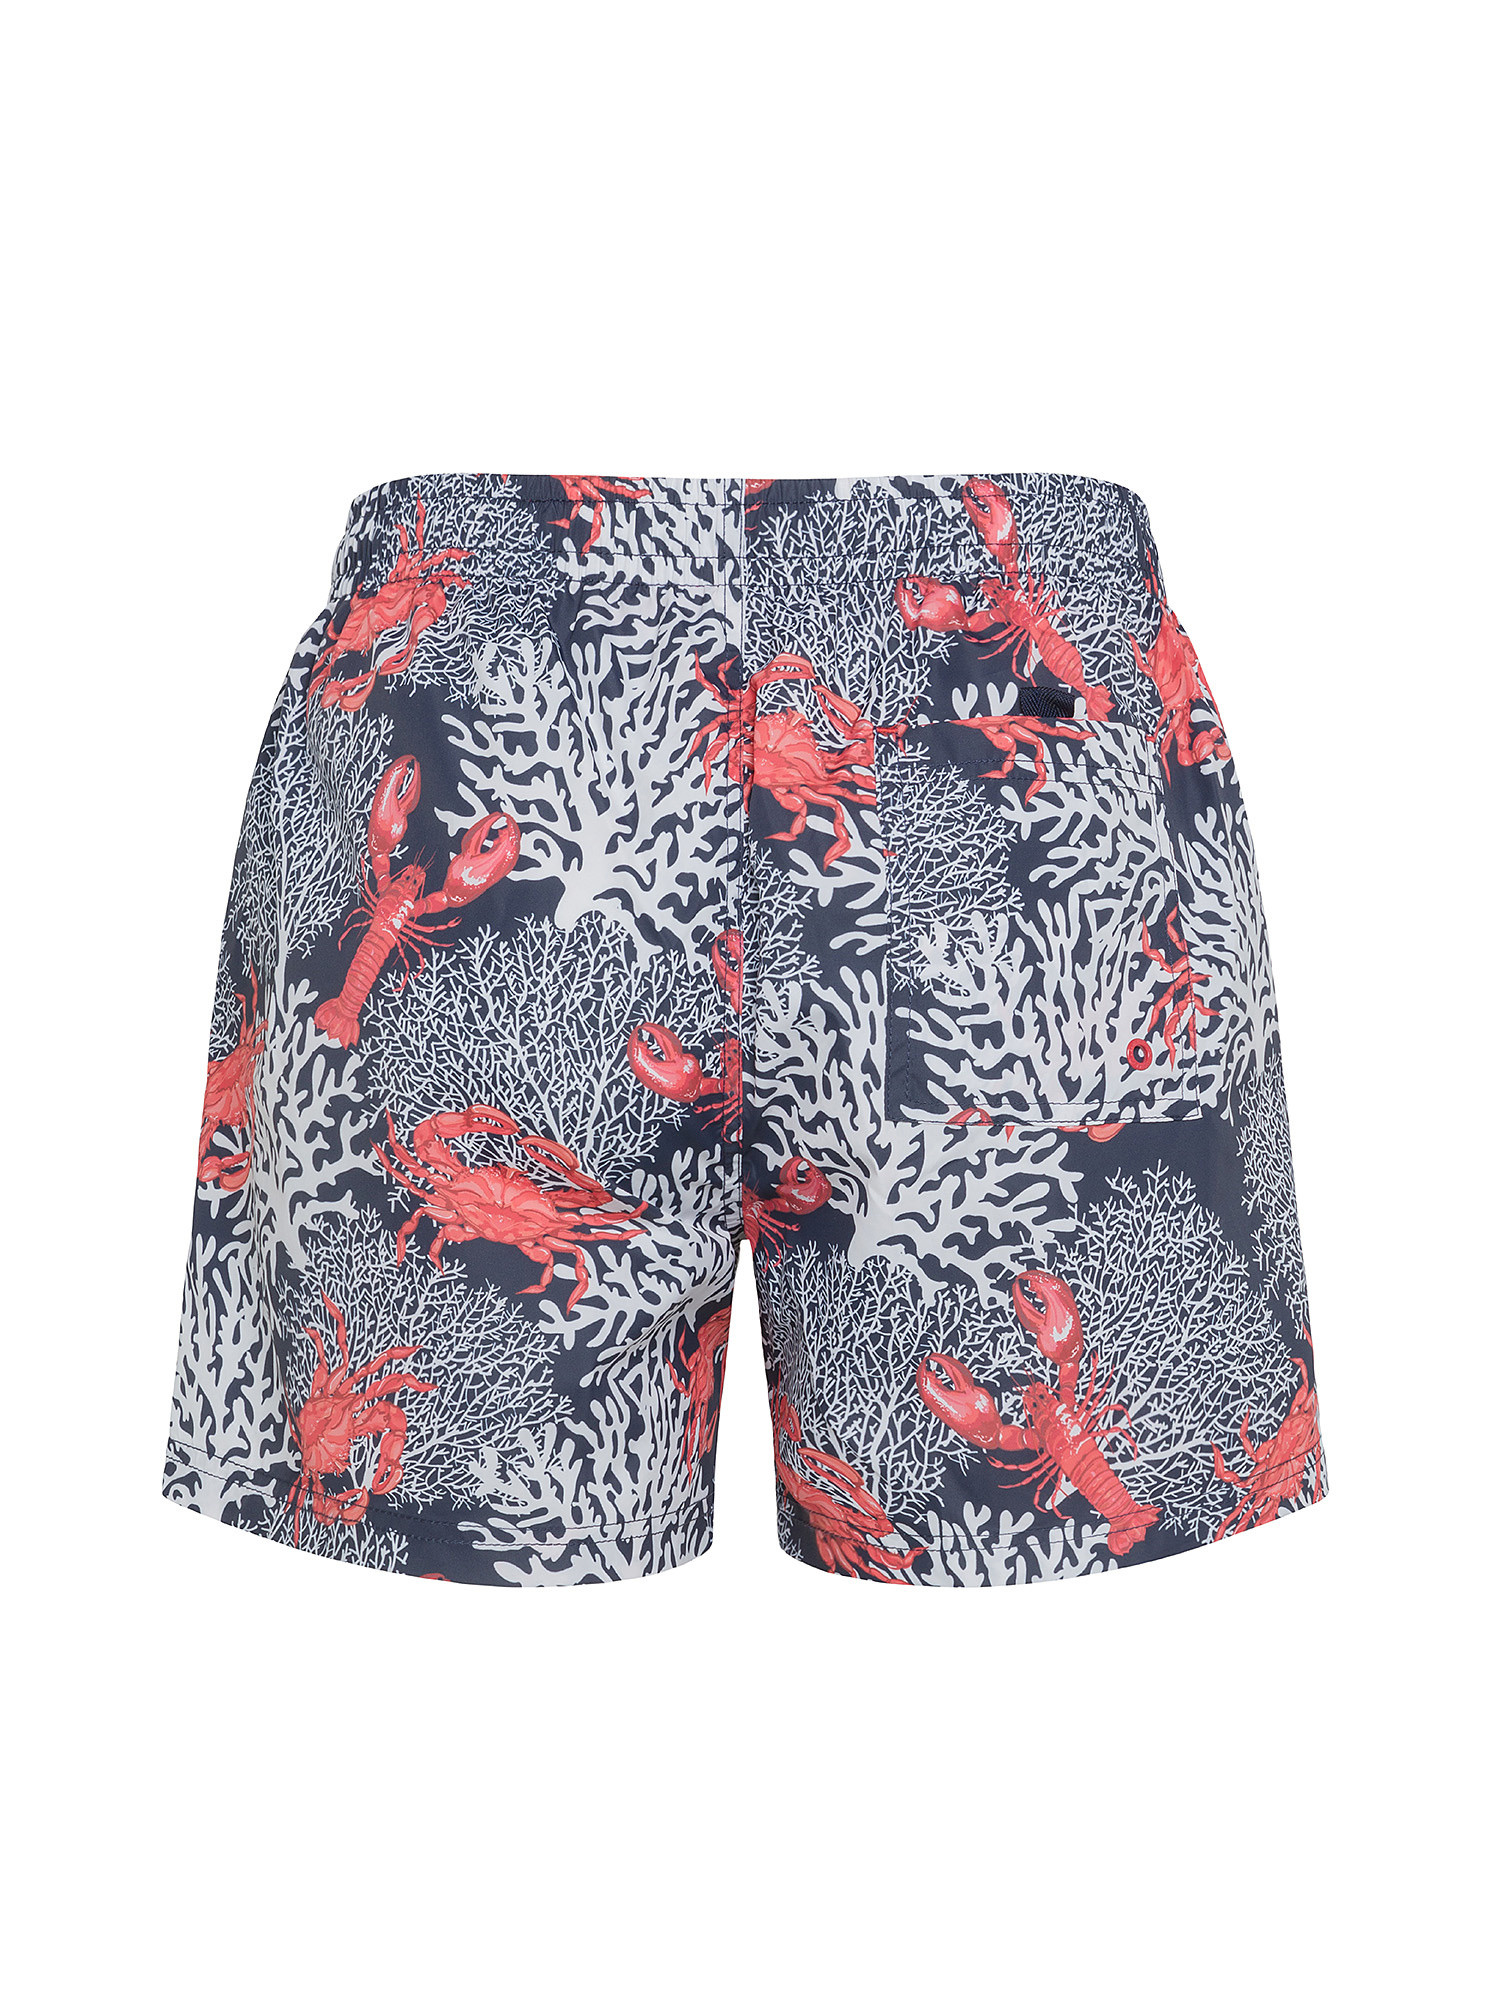 Pepe Jeans - Patterned swim trunks, Multicolor, large image number 1